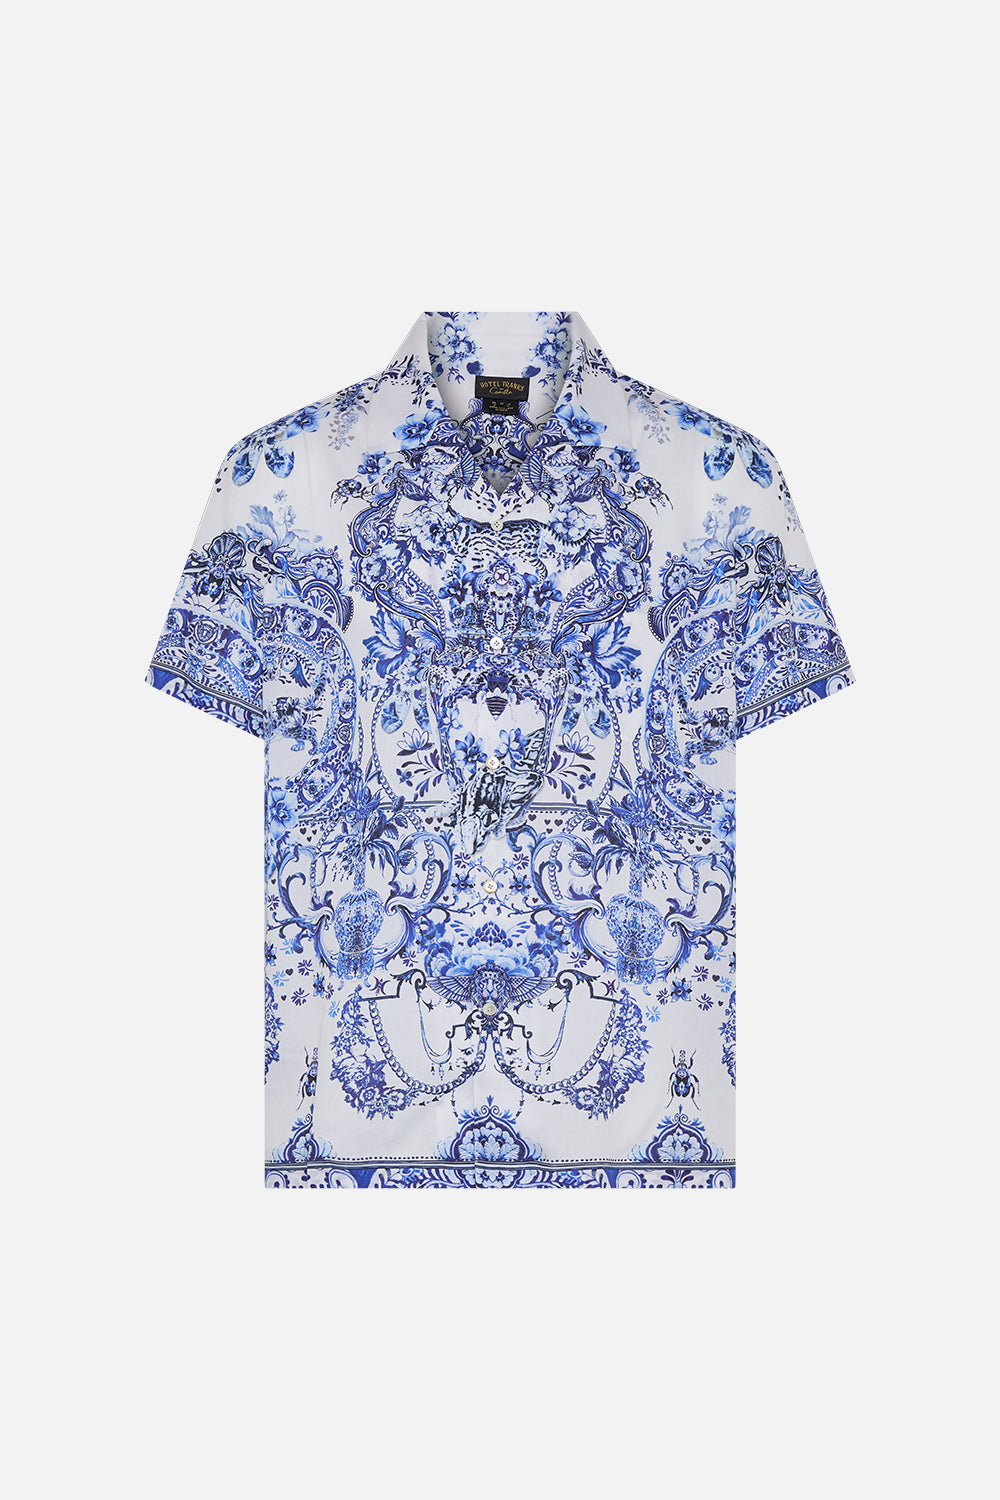 Hotel Franks By CAMILLA mens blue and white shirt in Glaze and Graze print